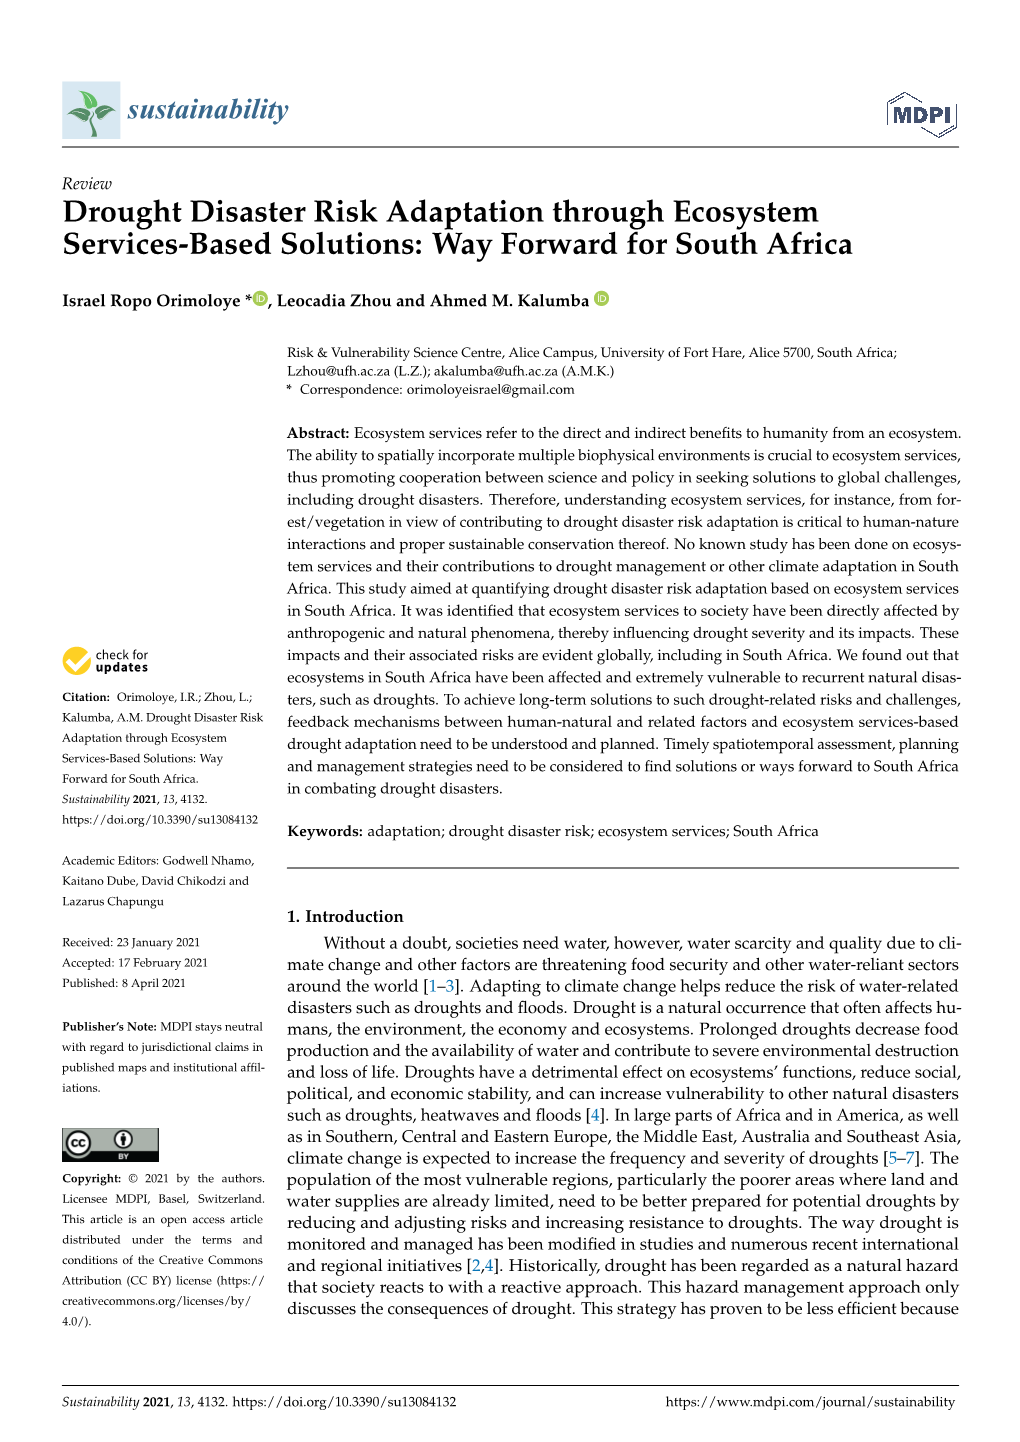 Drought Disaster Risk Adaptation Through Ecosystem Services-Based Solutions: Way Forward for South Africa